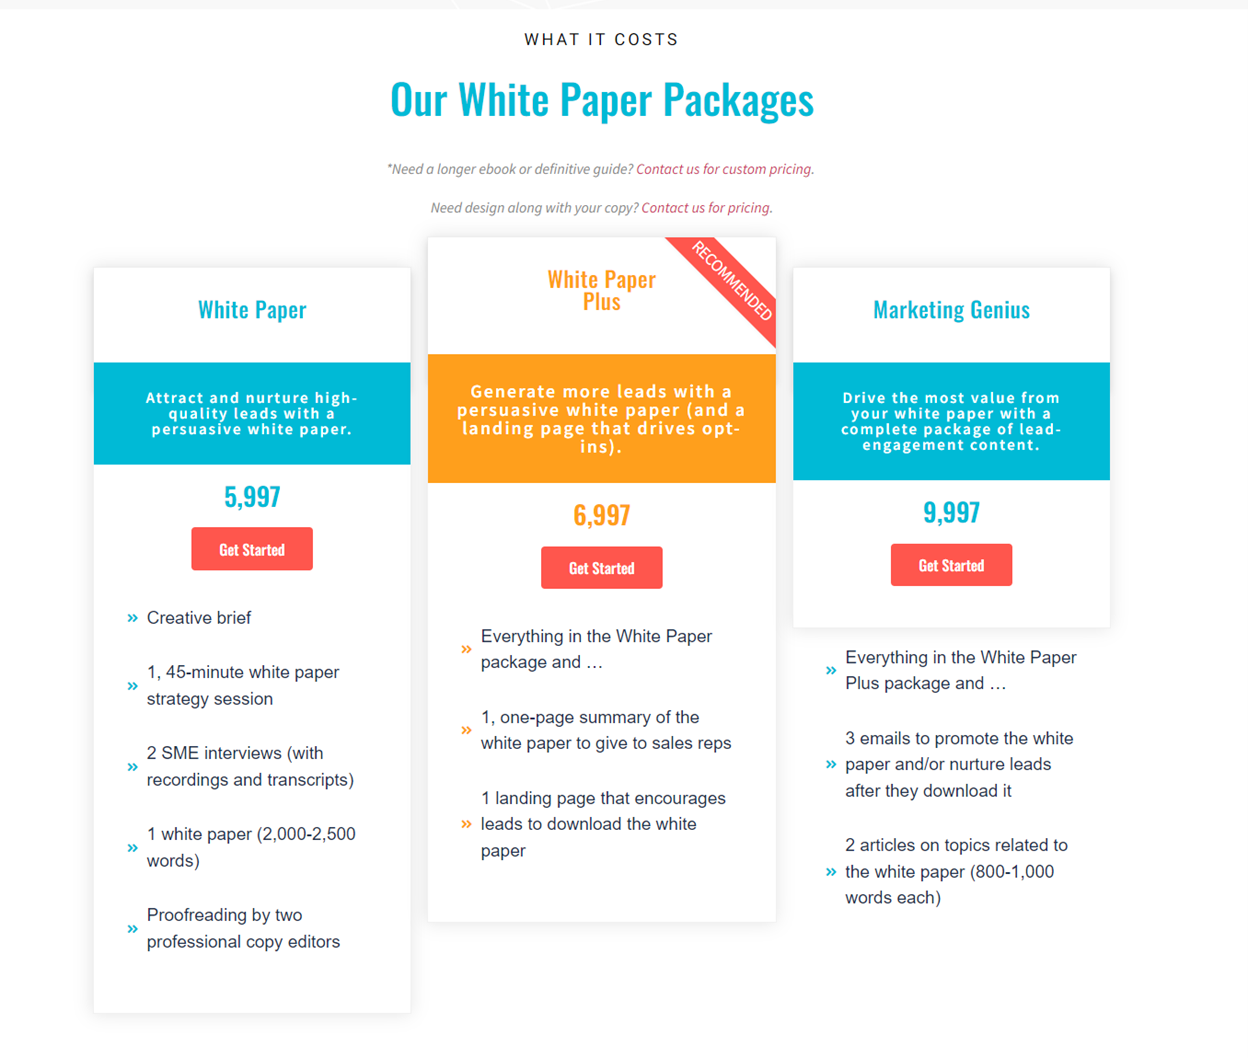 Website screen print that says, Our White Paper Packages. Package 1, White Paper, Attract and nuture high-quality leads with a persuasive white paper - 5,997.  Package 2, White Paper Plus, Generate more leads with a persuasive white paper (and a landing page that drives opt-ins). Package 3, Marketing Genius, Drive the most value from your white paper with a complete package of lead-engagement content.